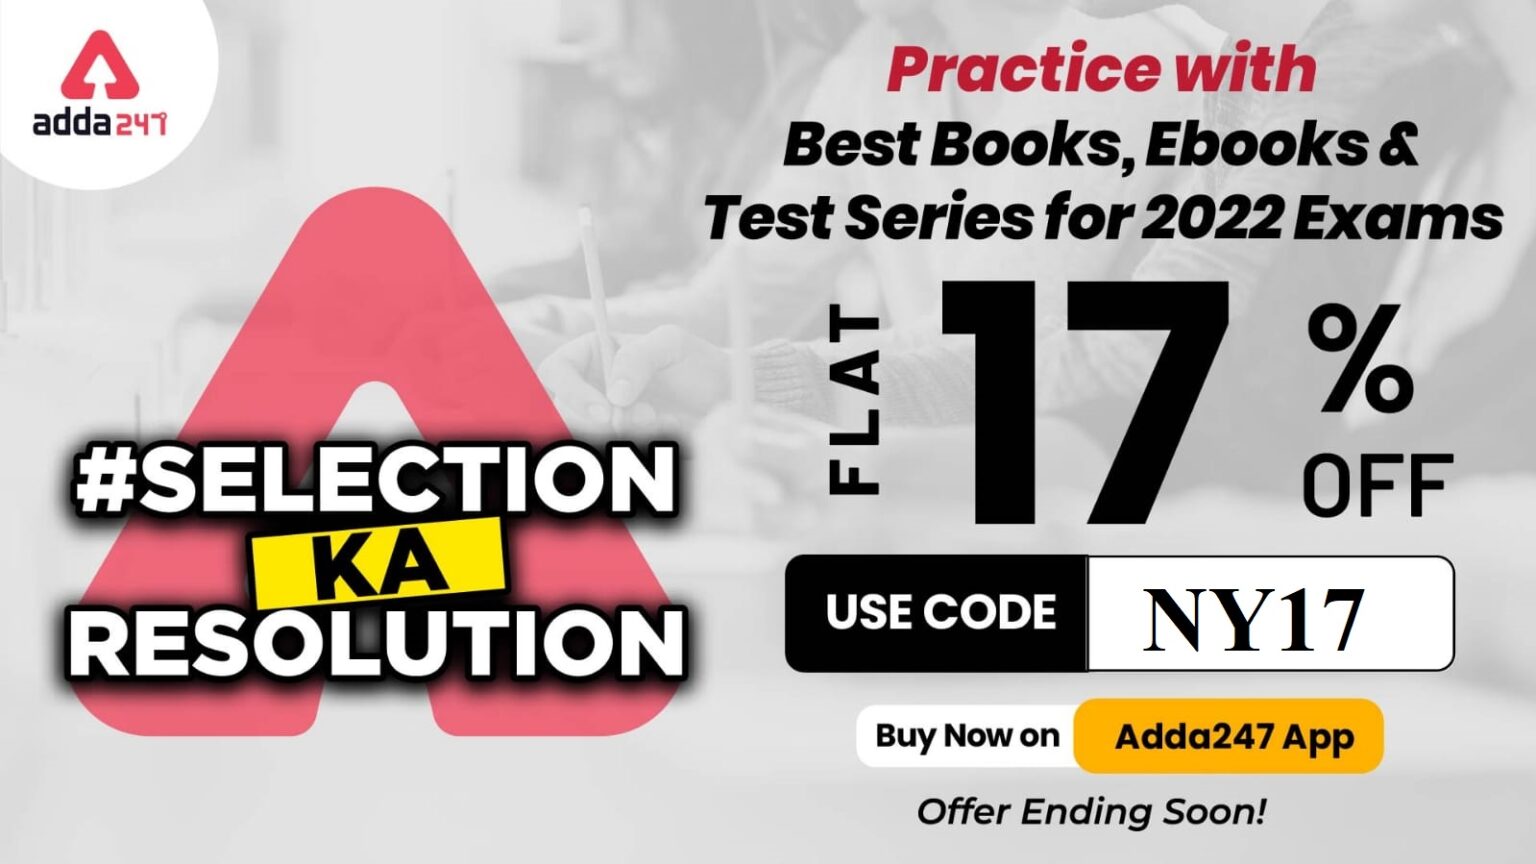 New Year Selection Ka Resolution Offer On Books, E-books, Test series_40.1